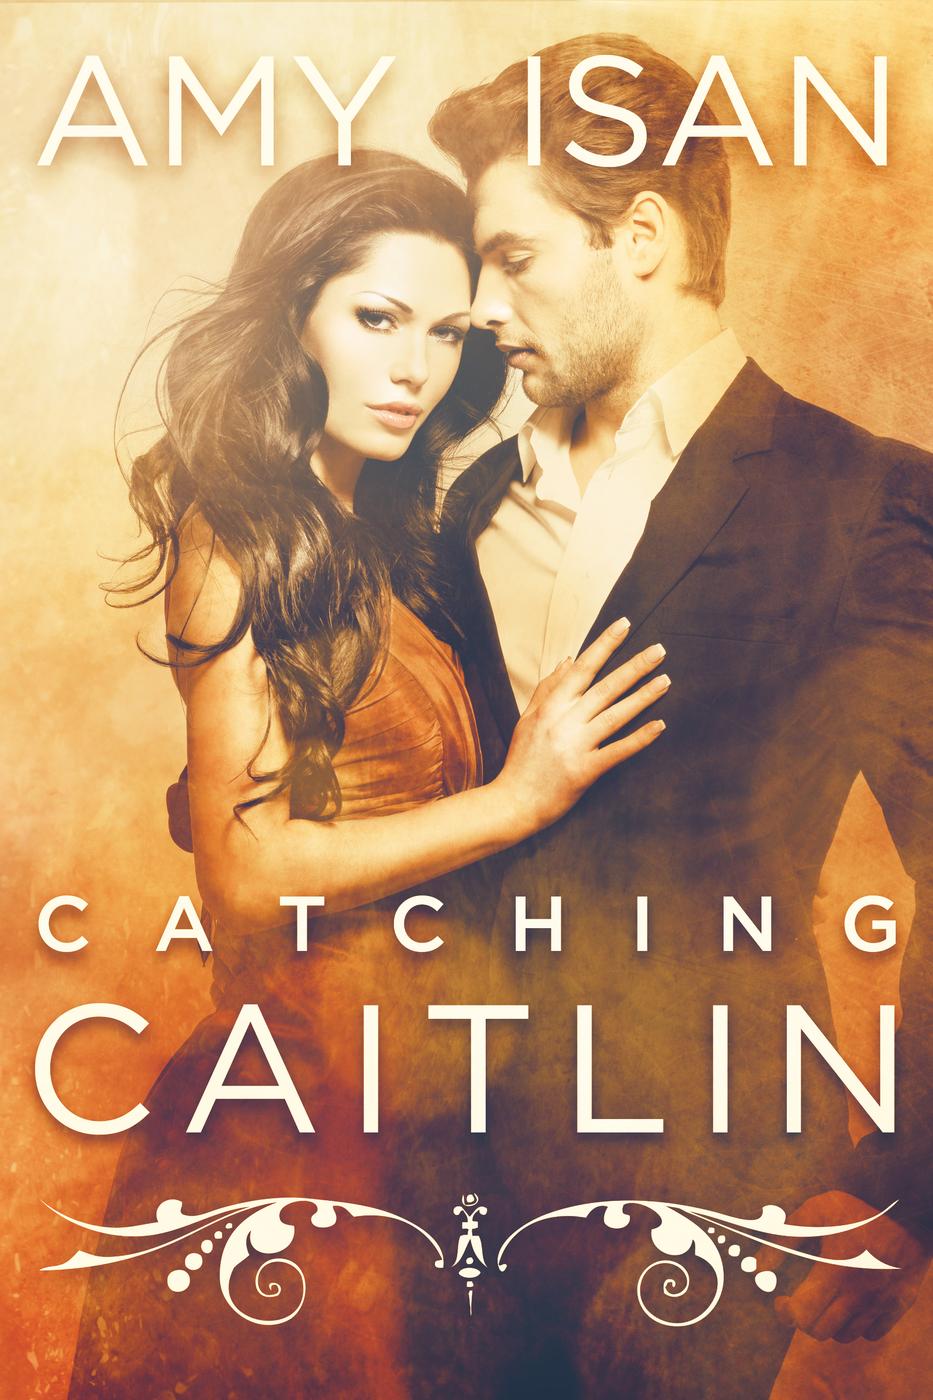 Catching Caitlin (2013) by Amy Isan